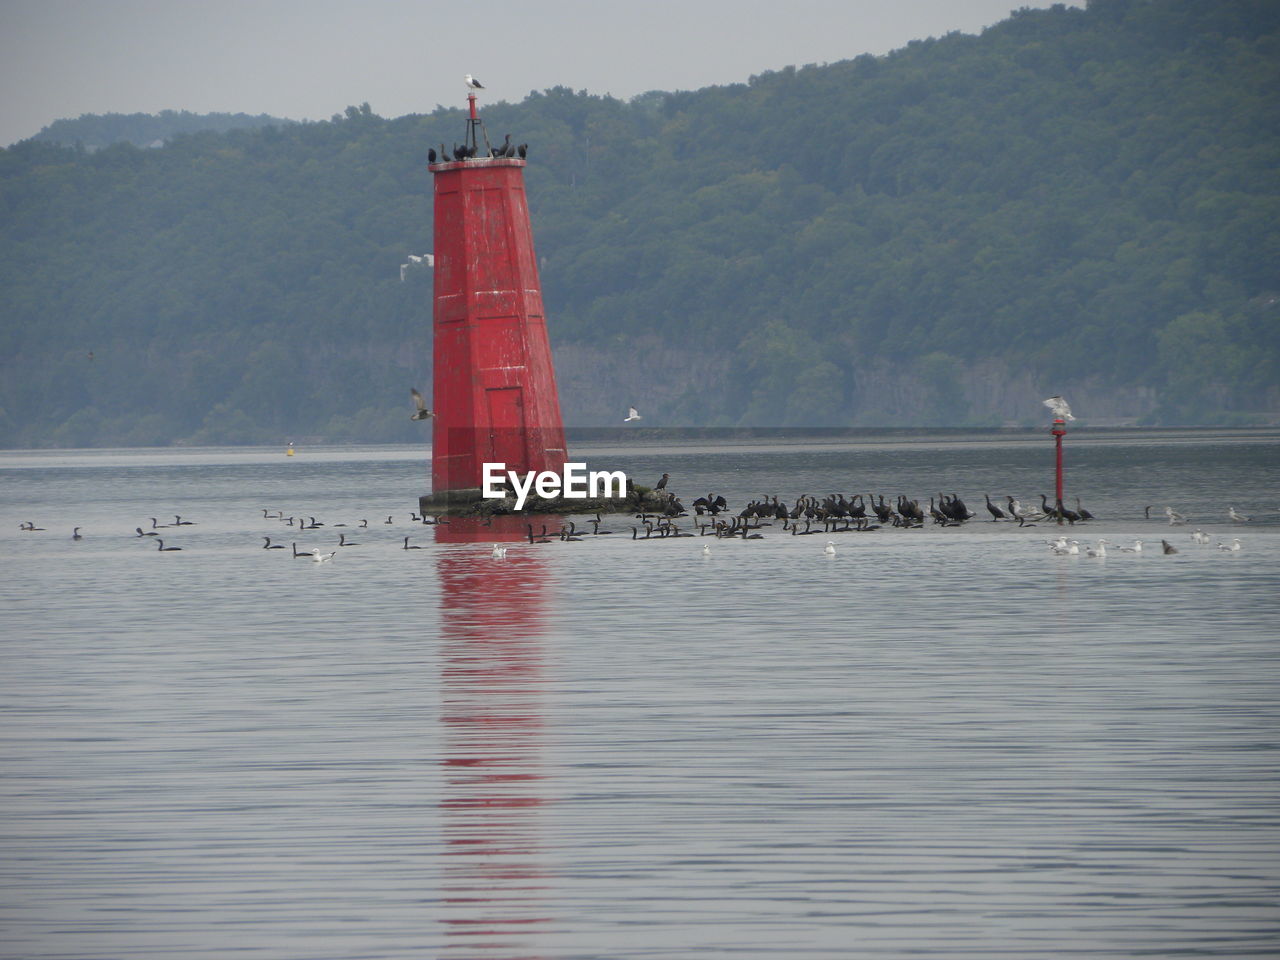 Waterfowl congregated at the red lighthouse on cayuga lake in ithaca, ny in usa